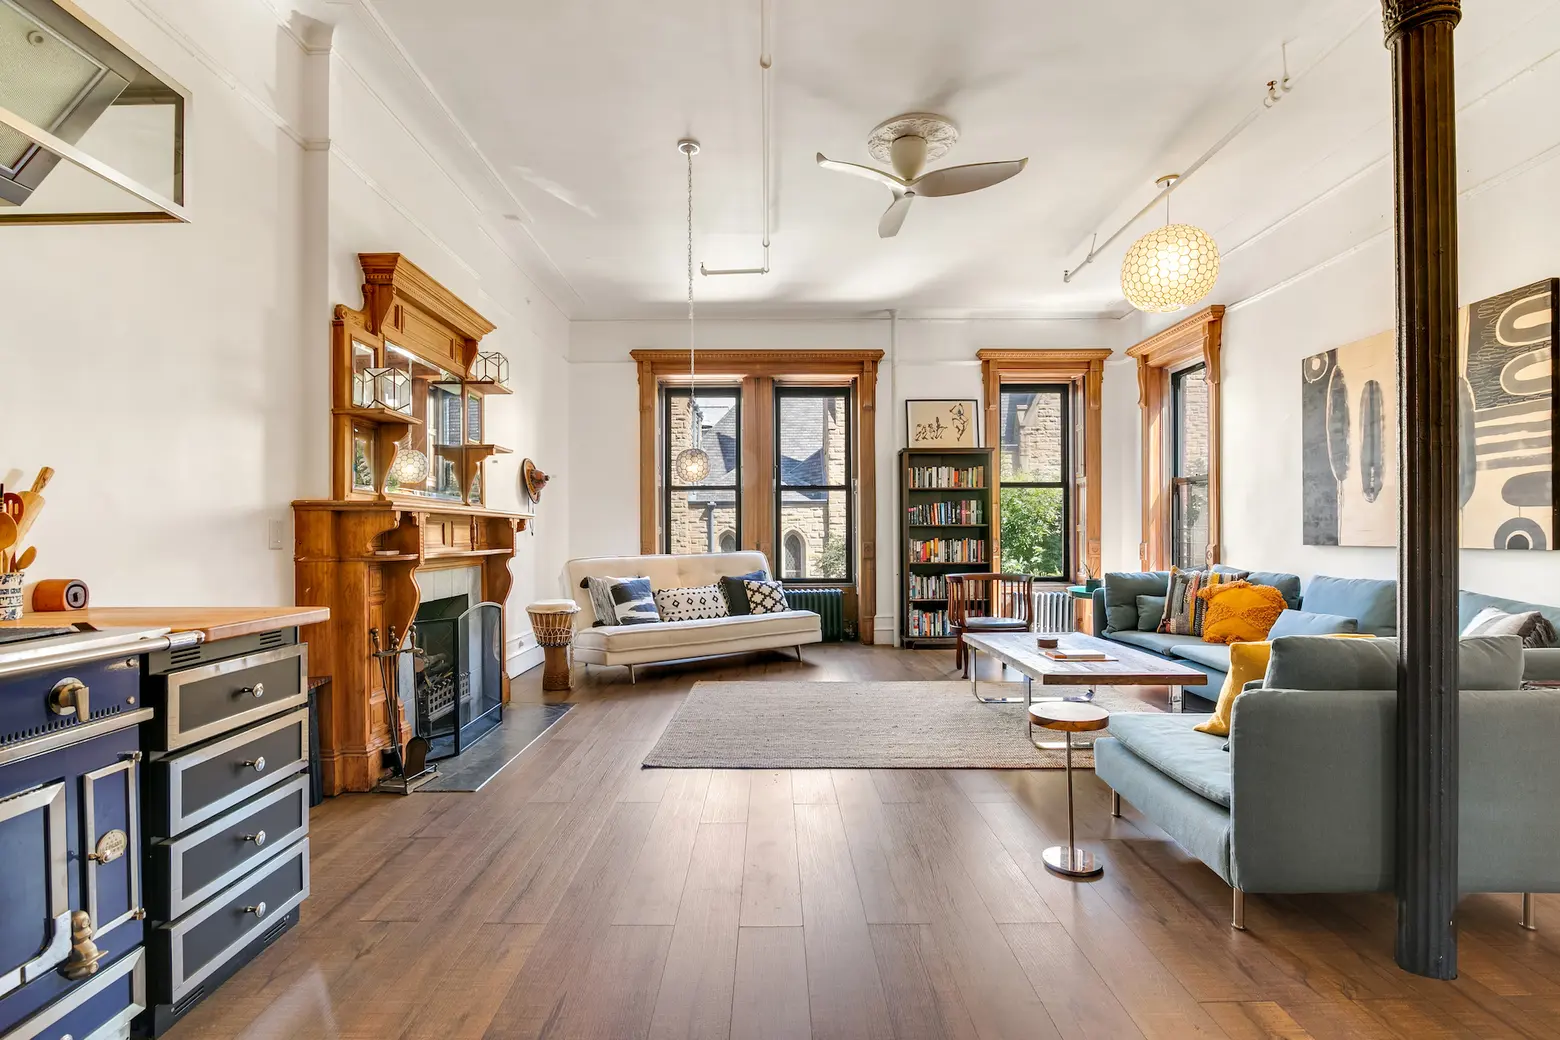 Asking $4.3M, this historic Harlem brownstone is move-in ready and dressed to impress